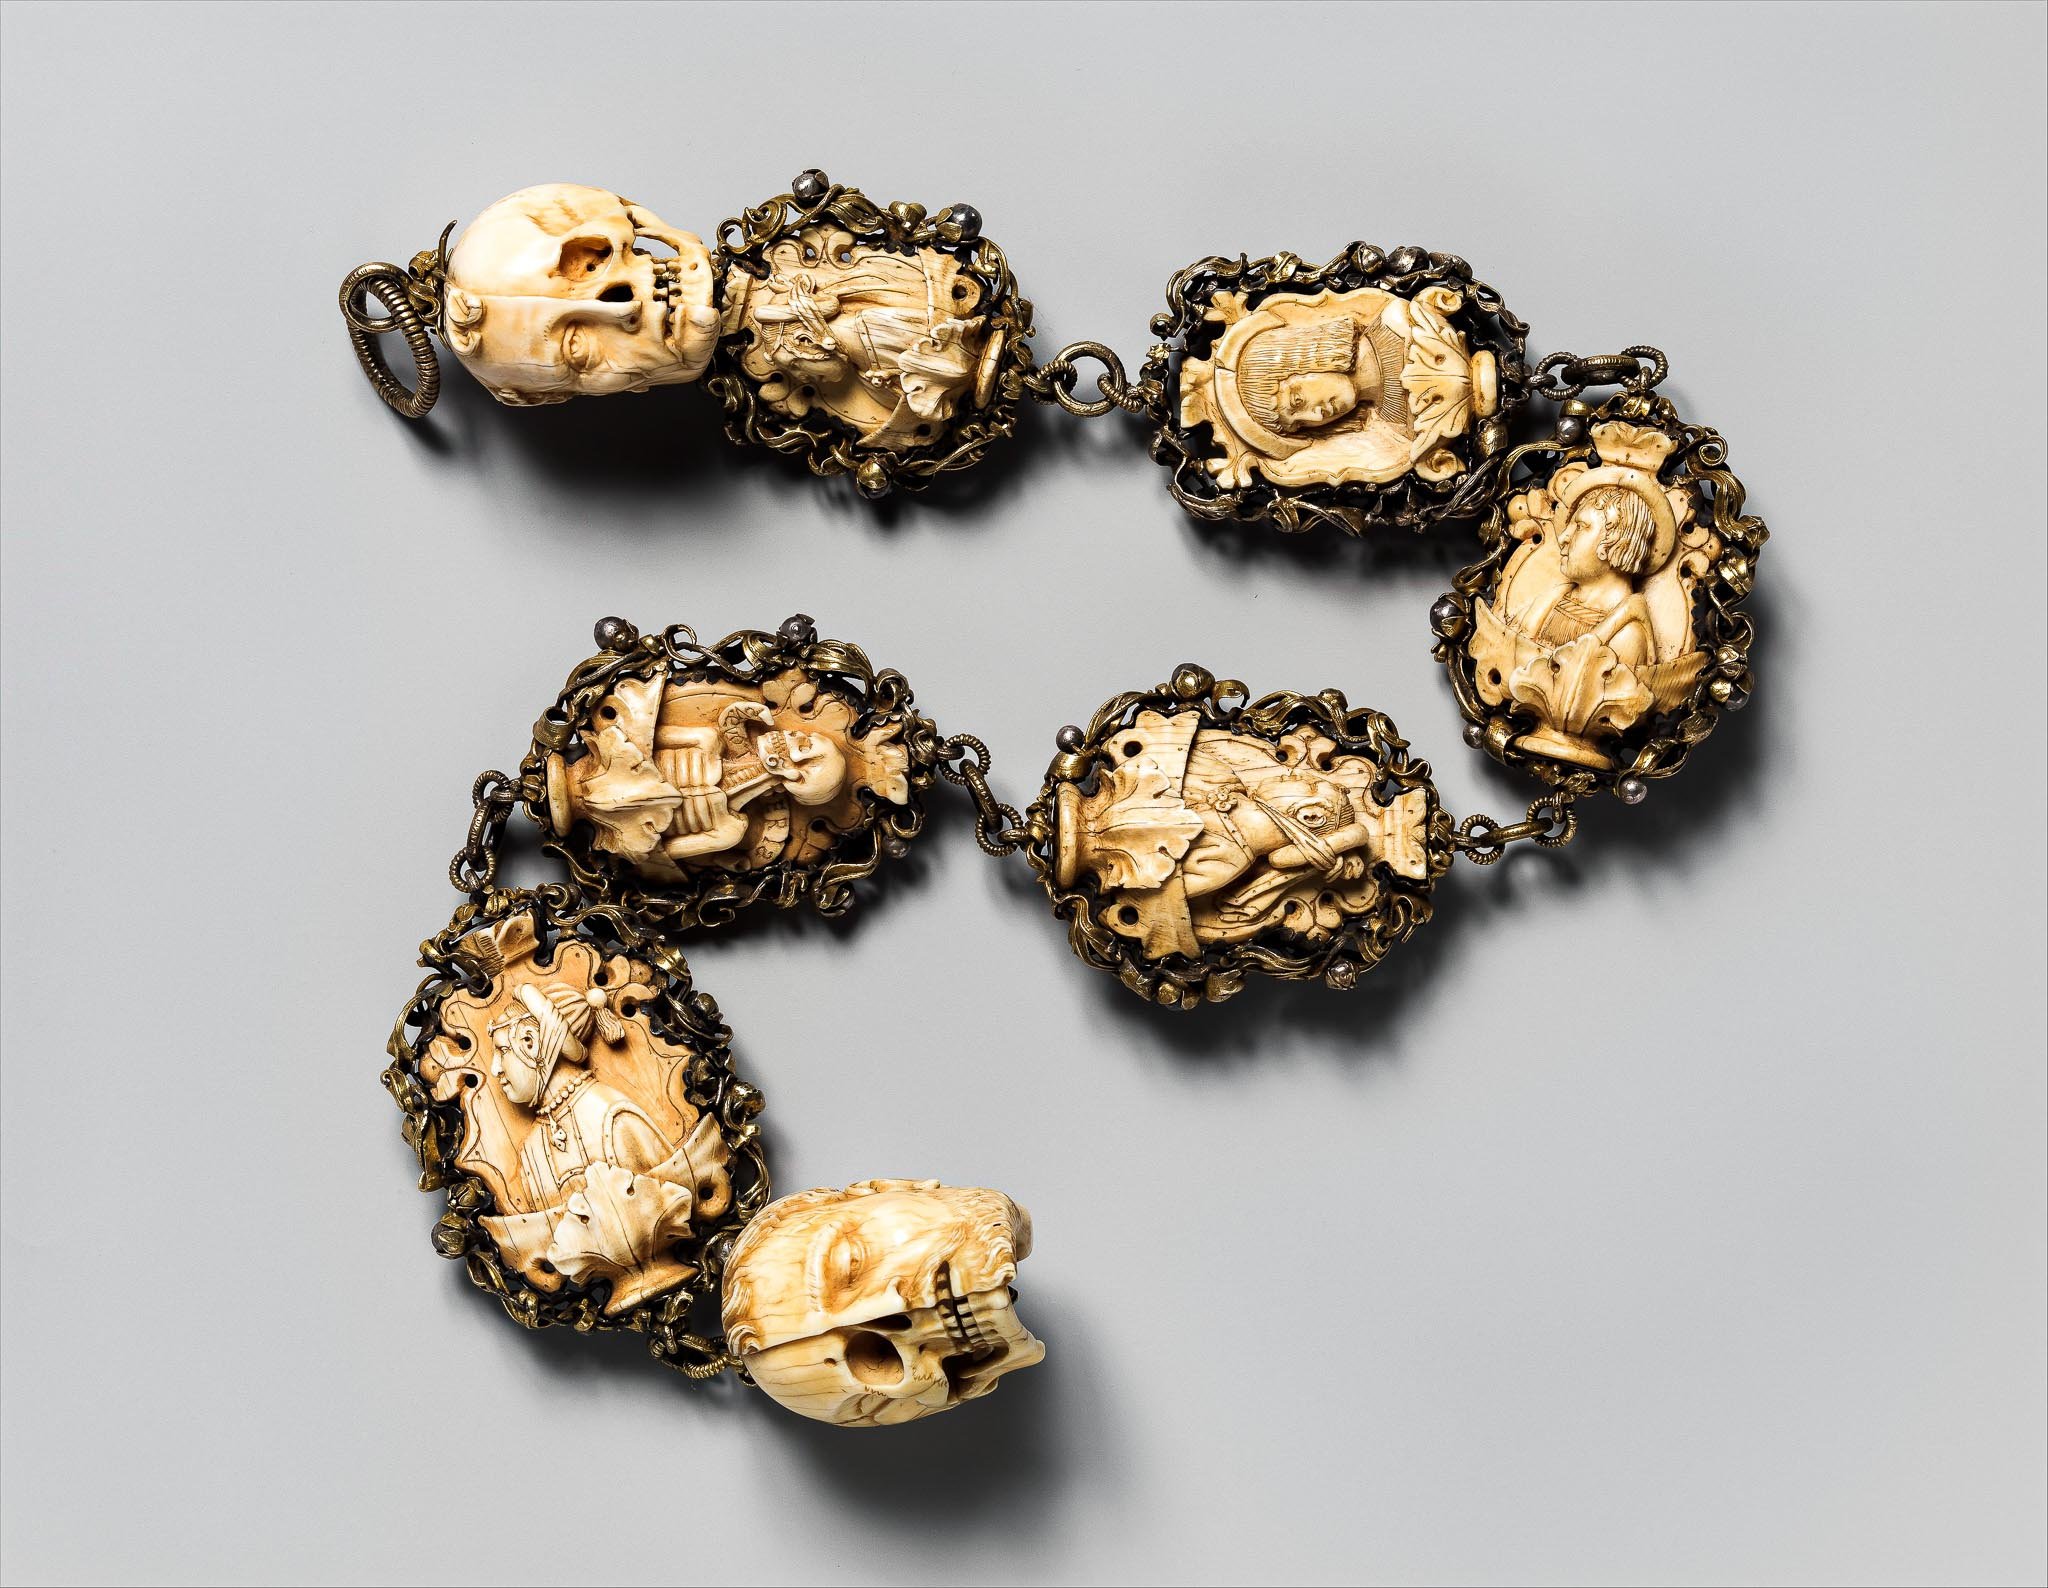 Image showing Momento Mori Rosary - Met Museum